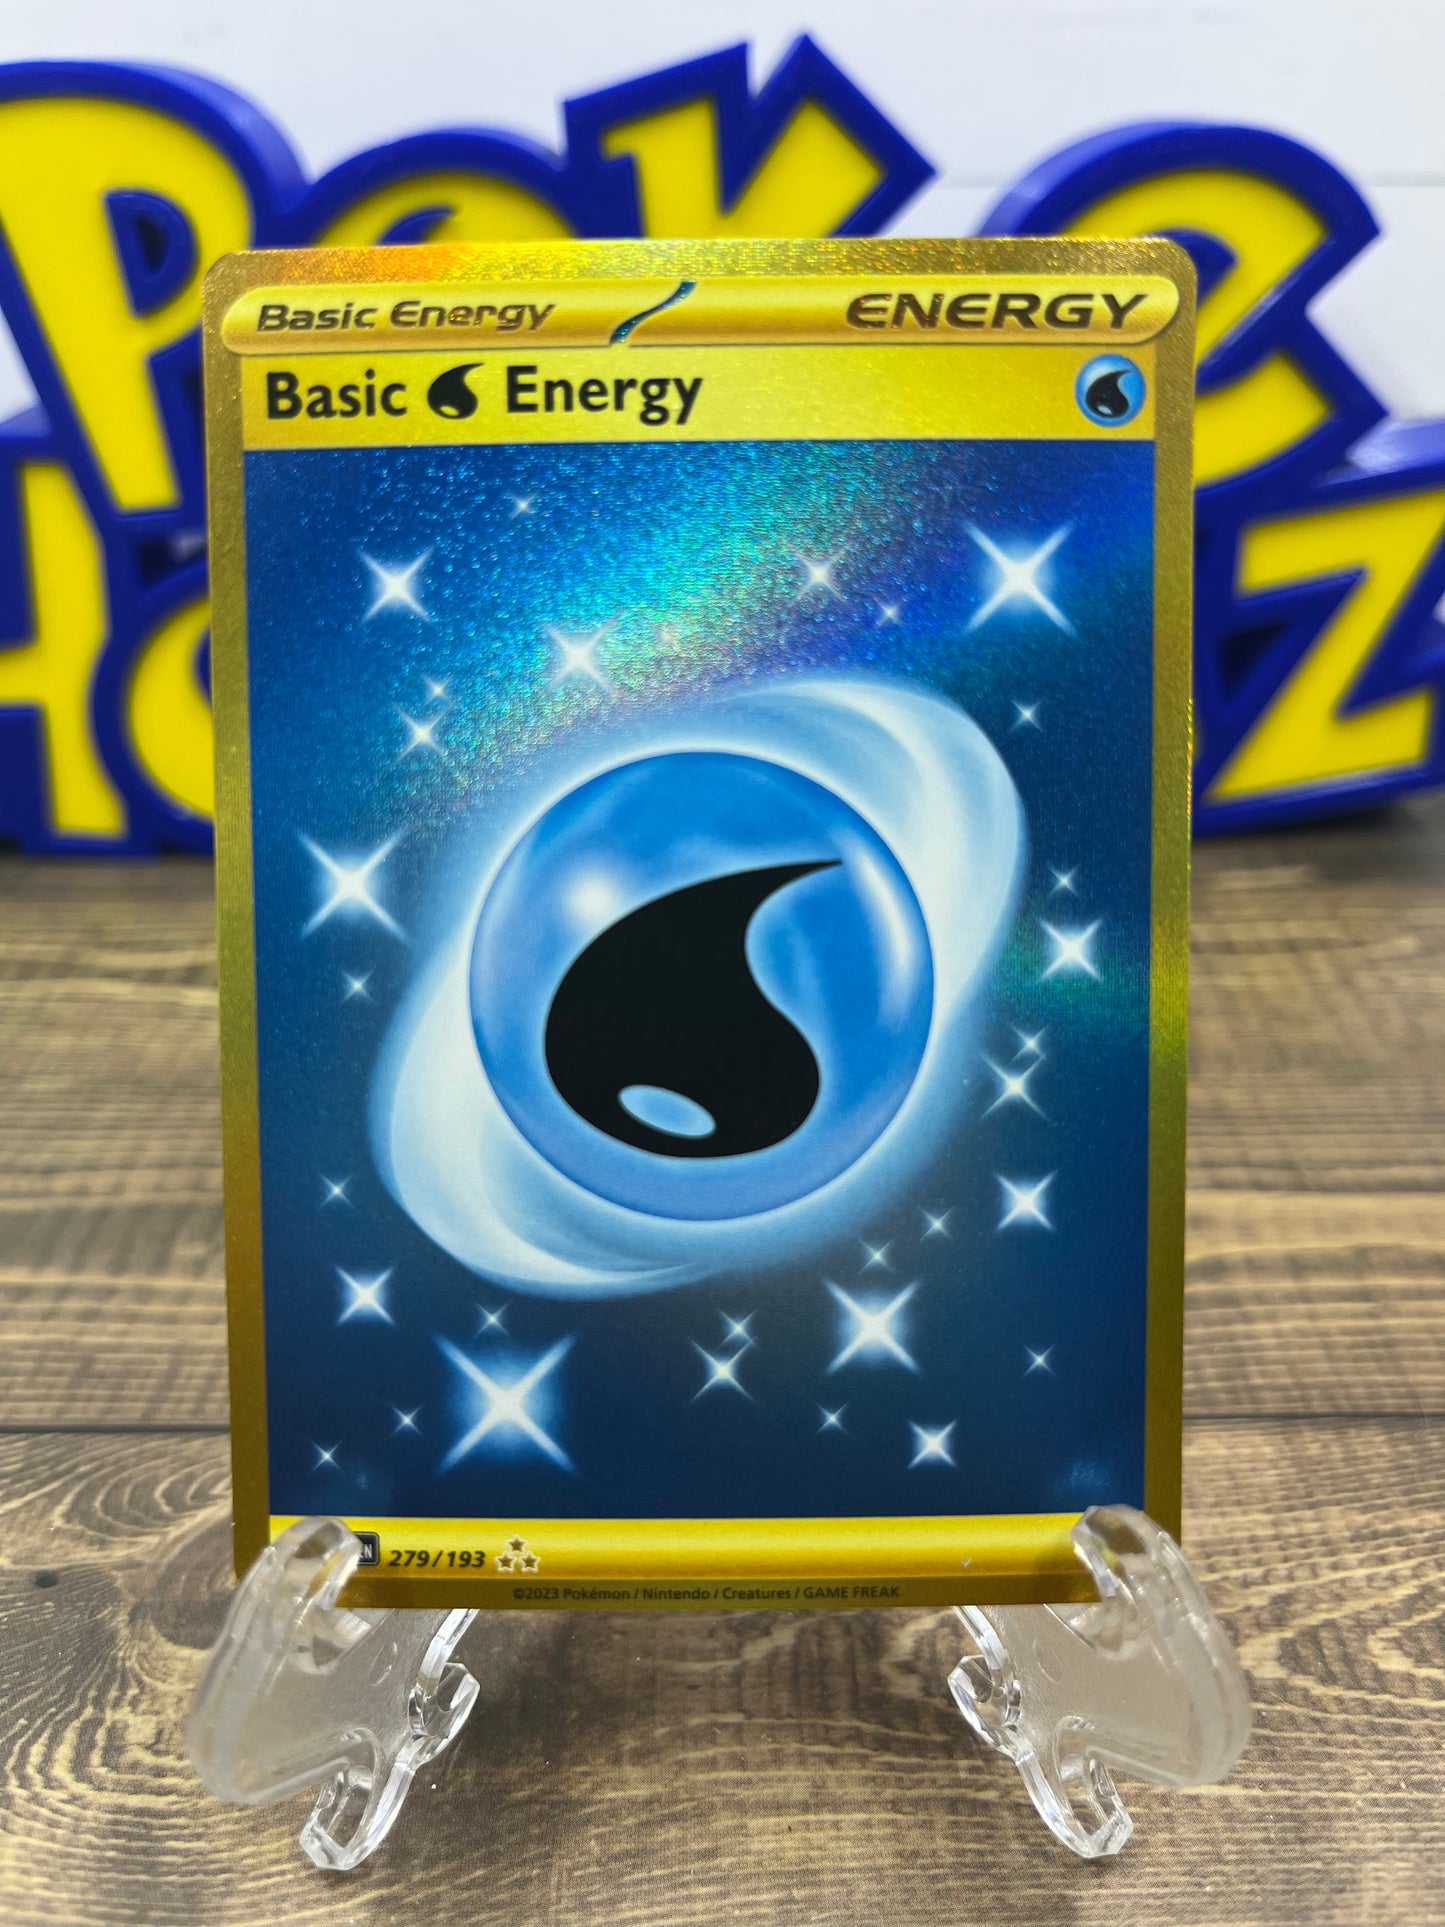 Water Energy (Gold) - 279/193